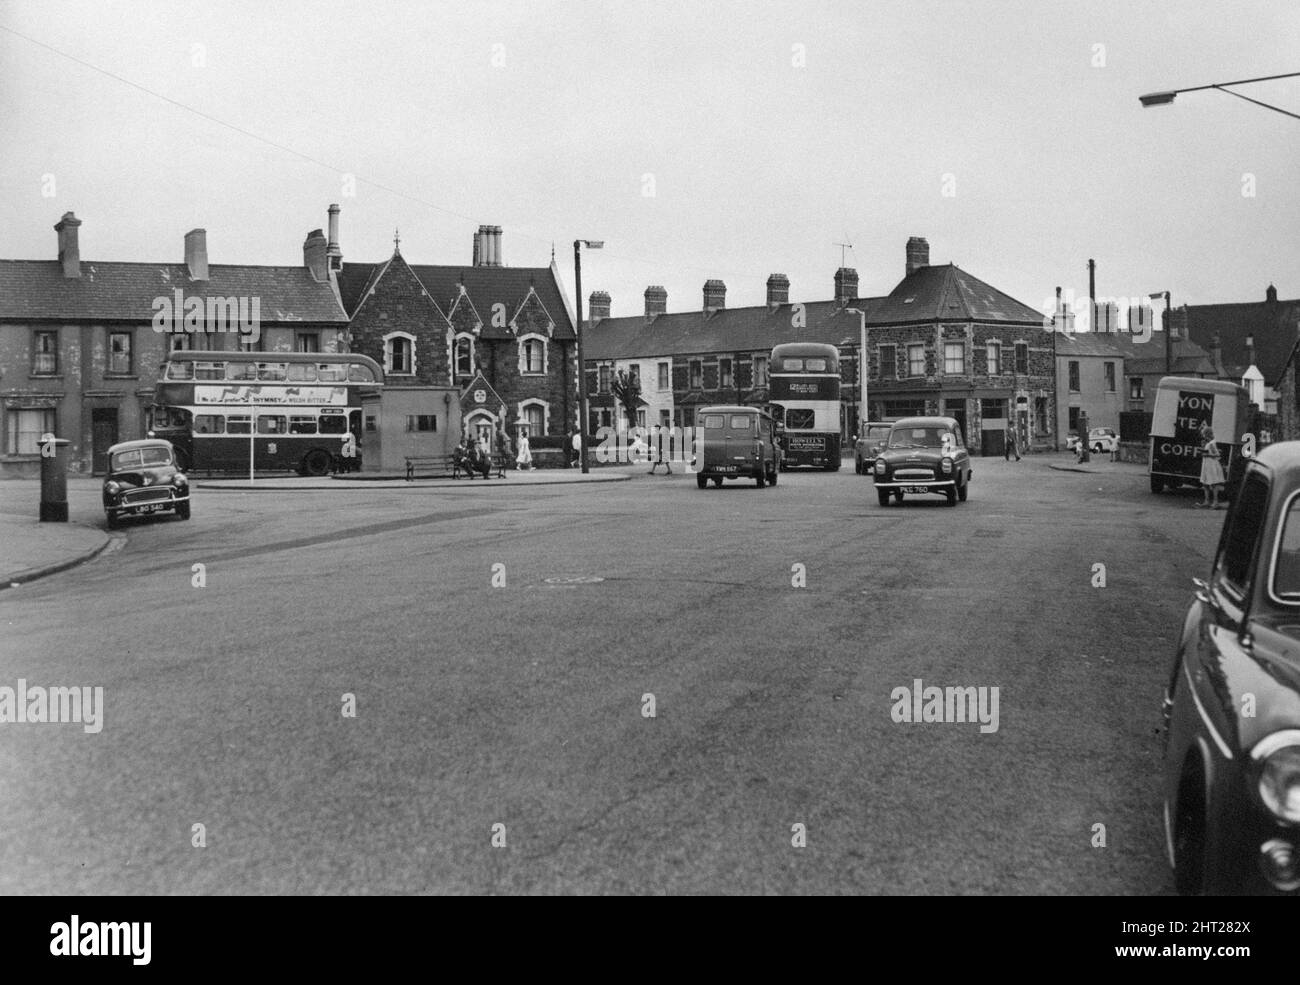 Adamsdown Square, Adamsdown, an inner city area and community in the south of Cardiff, Wales. Circa 1965. Our Picture Shows ... Adamsdown Square where five roads meet. Stock Photo